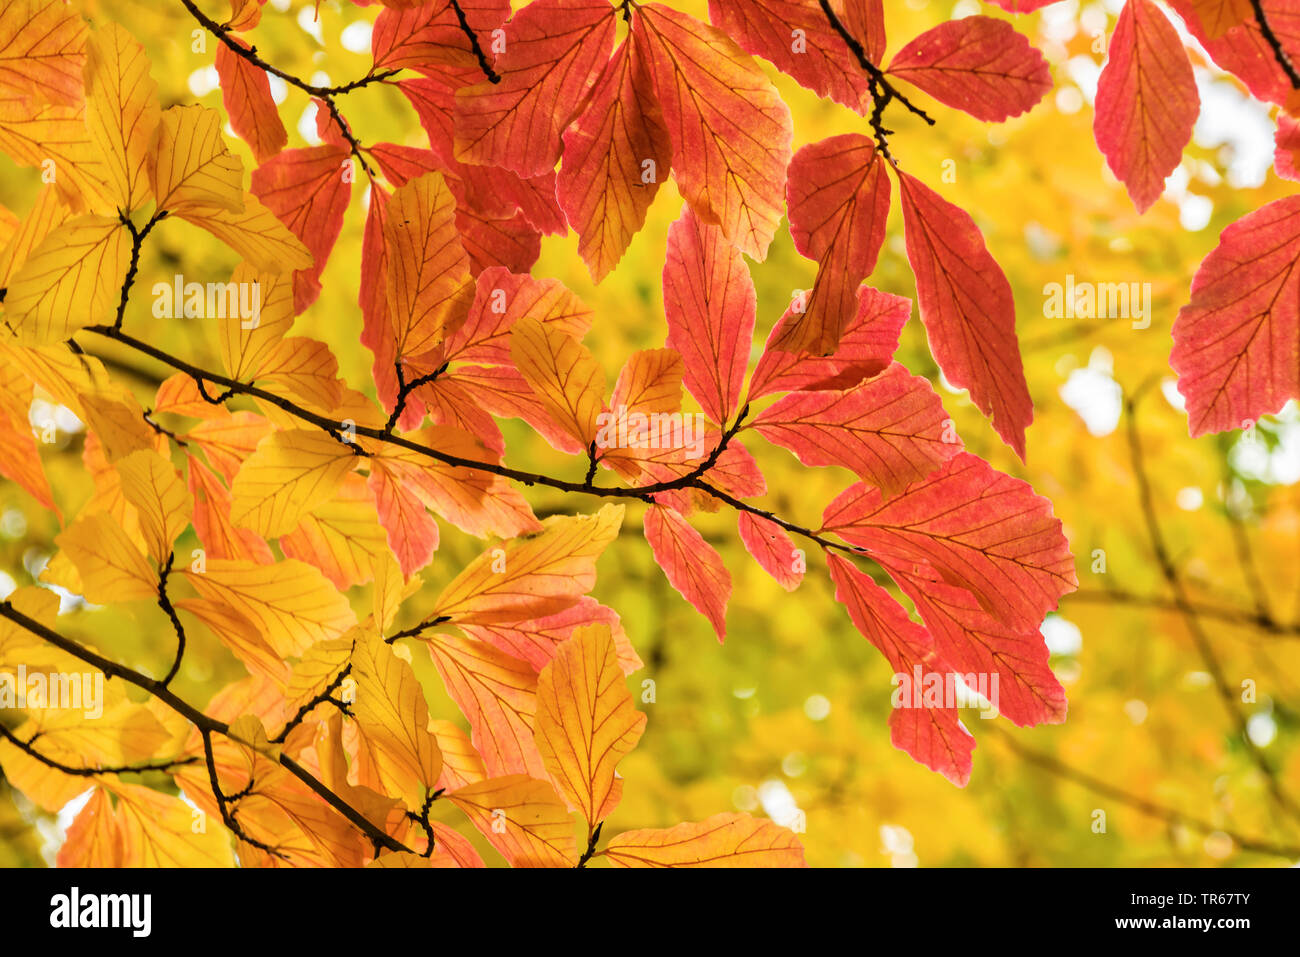 Ironwood, parrotia (Parrotia persica), branch with autumn leaves, Germany, Berlin Stock Photo